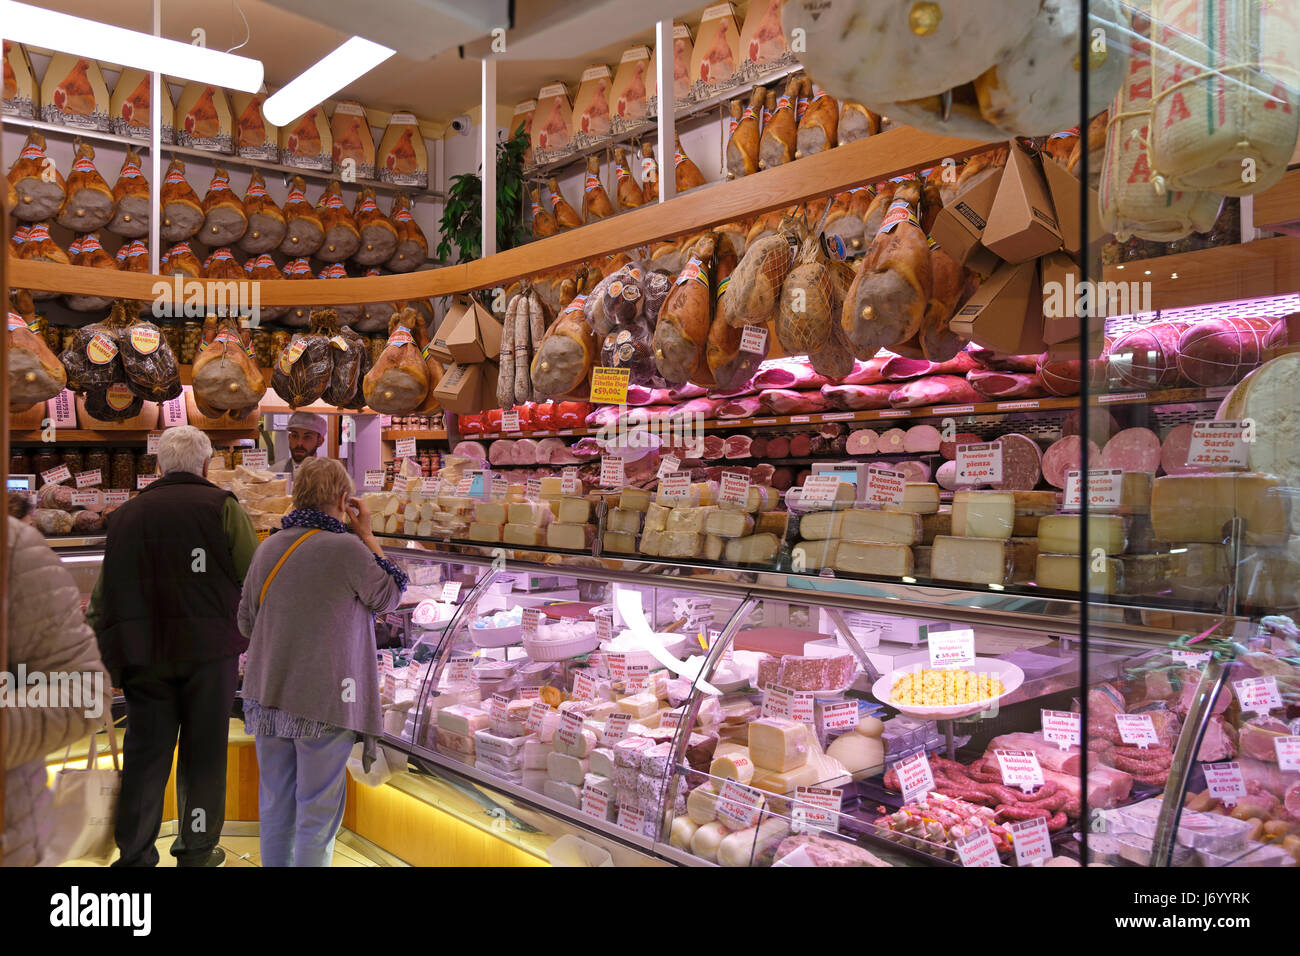 Cured meats and Parmesan cheese shop, Via Pescherie Vecchie, street of the Old Fish Mongers, Bologna, Emilia-Romagna, Italy, Europe. Stock Photo